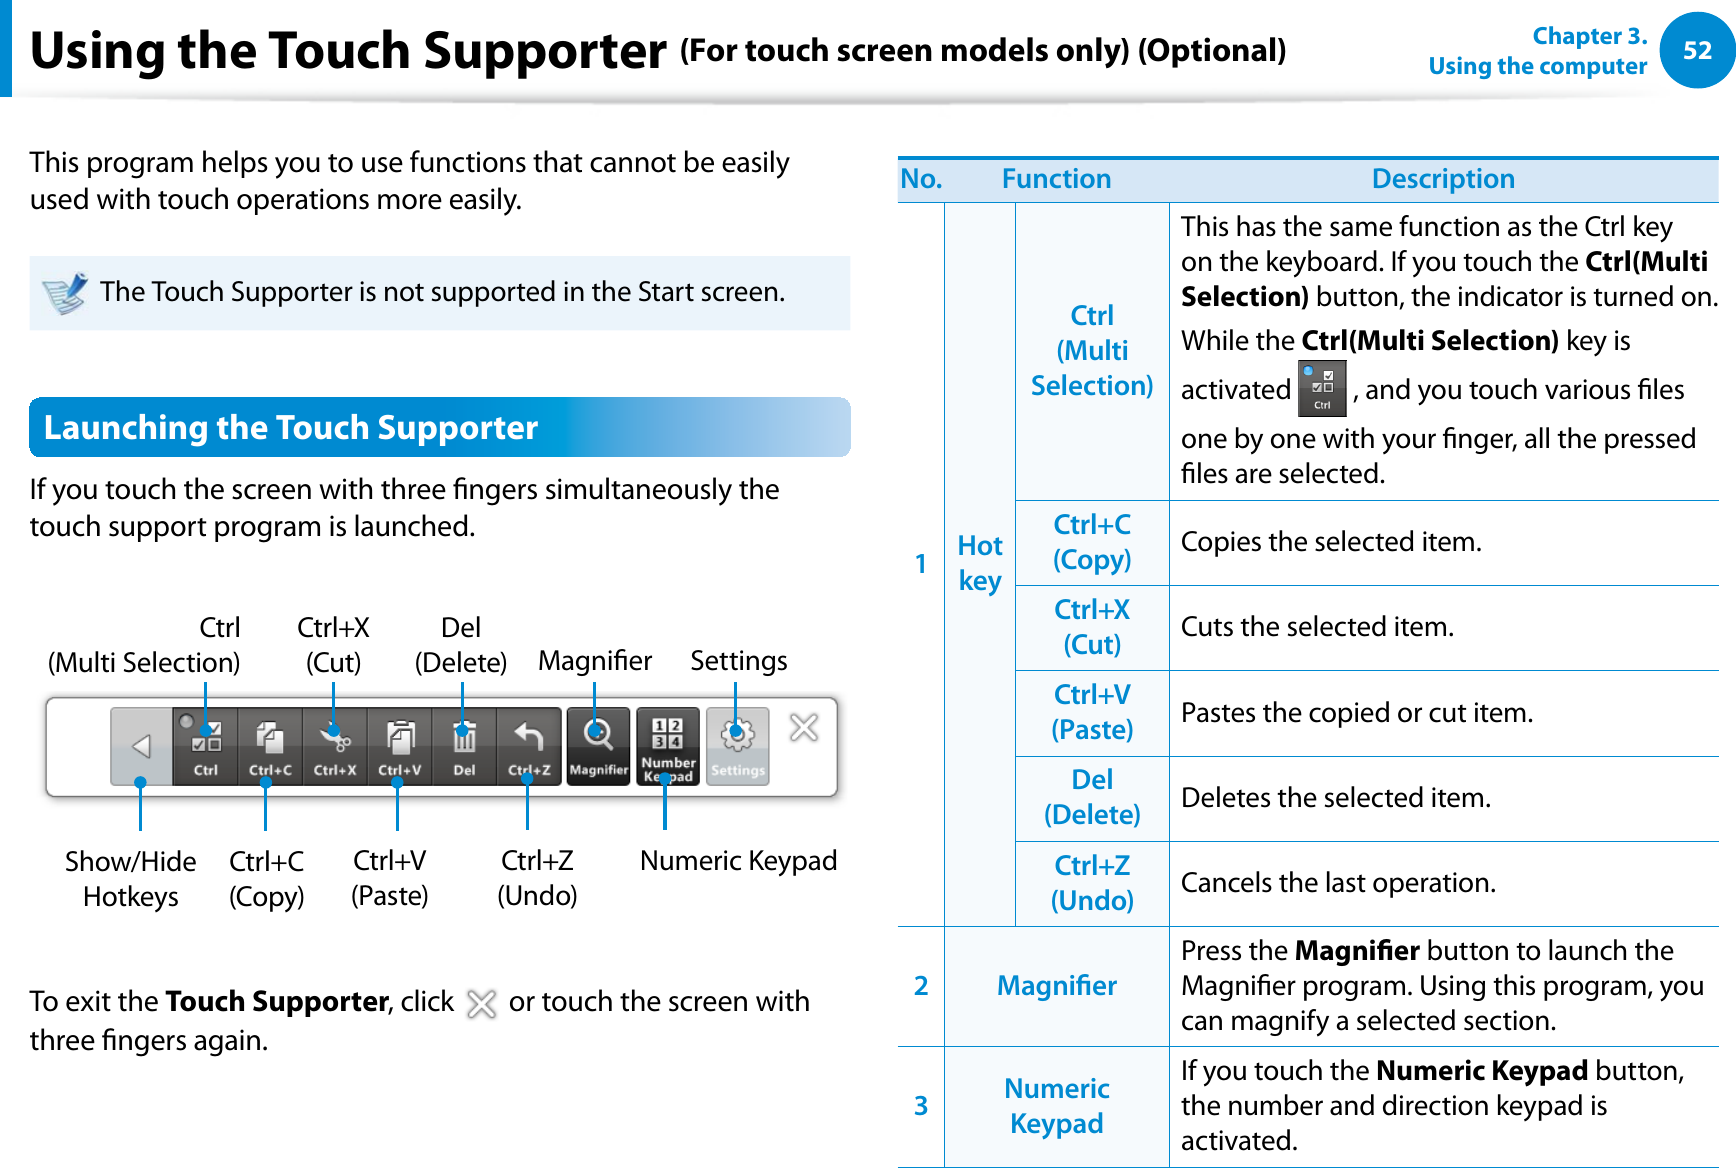 52Chapter 3.  Using the computerUsing the Touch Supporter (For touch screen models only) (Optional)This program helps you to use functions that cannot be easily used with touch operations more easily.The Touch Supporter is not supported in the Start screen. Launching the Touch SupporterIf you touch the screen with three ngers simultaneously the touch support program is launched.Ctrl+C (Copy)Ctrl (Multi Selection)Ctrl+X (Cut)Del (Delete) Magnier SettingsShow/Hide HotkeysCtrl+V (Paste)Ctrl+Z (Undo)Numeric KeypadTo exit the Touch Supporter, click   or touch the screen with three ngers again.No. Function Description1Hot keyCtrl (Multi Selection)This has the same function as the Ctrl key on the keyboard. If you touch the Ctrl(Multi Selection) button, the indicator is turned on.While the Ctrl(Multi Selection) key is activated   , and you touch various les one by one with your nger, all the pressed les are selected.Ctrl+C (Copy) Copies the selected item.Ctrl+X (Cut) Cuts the selected item.Ctrl+V (Paste) Pastes the copied or cut item.Del (Delete) Deletes the selected item.Ctrl+Z (Undo) Cancels the last operation. 2 MagnierPress the Magnier button to launch the Magnier program. Using this program, you can magnify a selected section.3Numeric KeypadIf you touch the Numeric Keypad button, the number and direction keypad is activated.